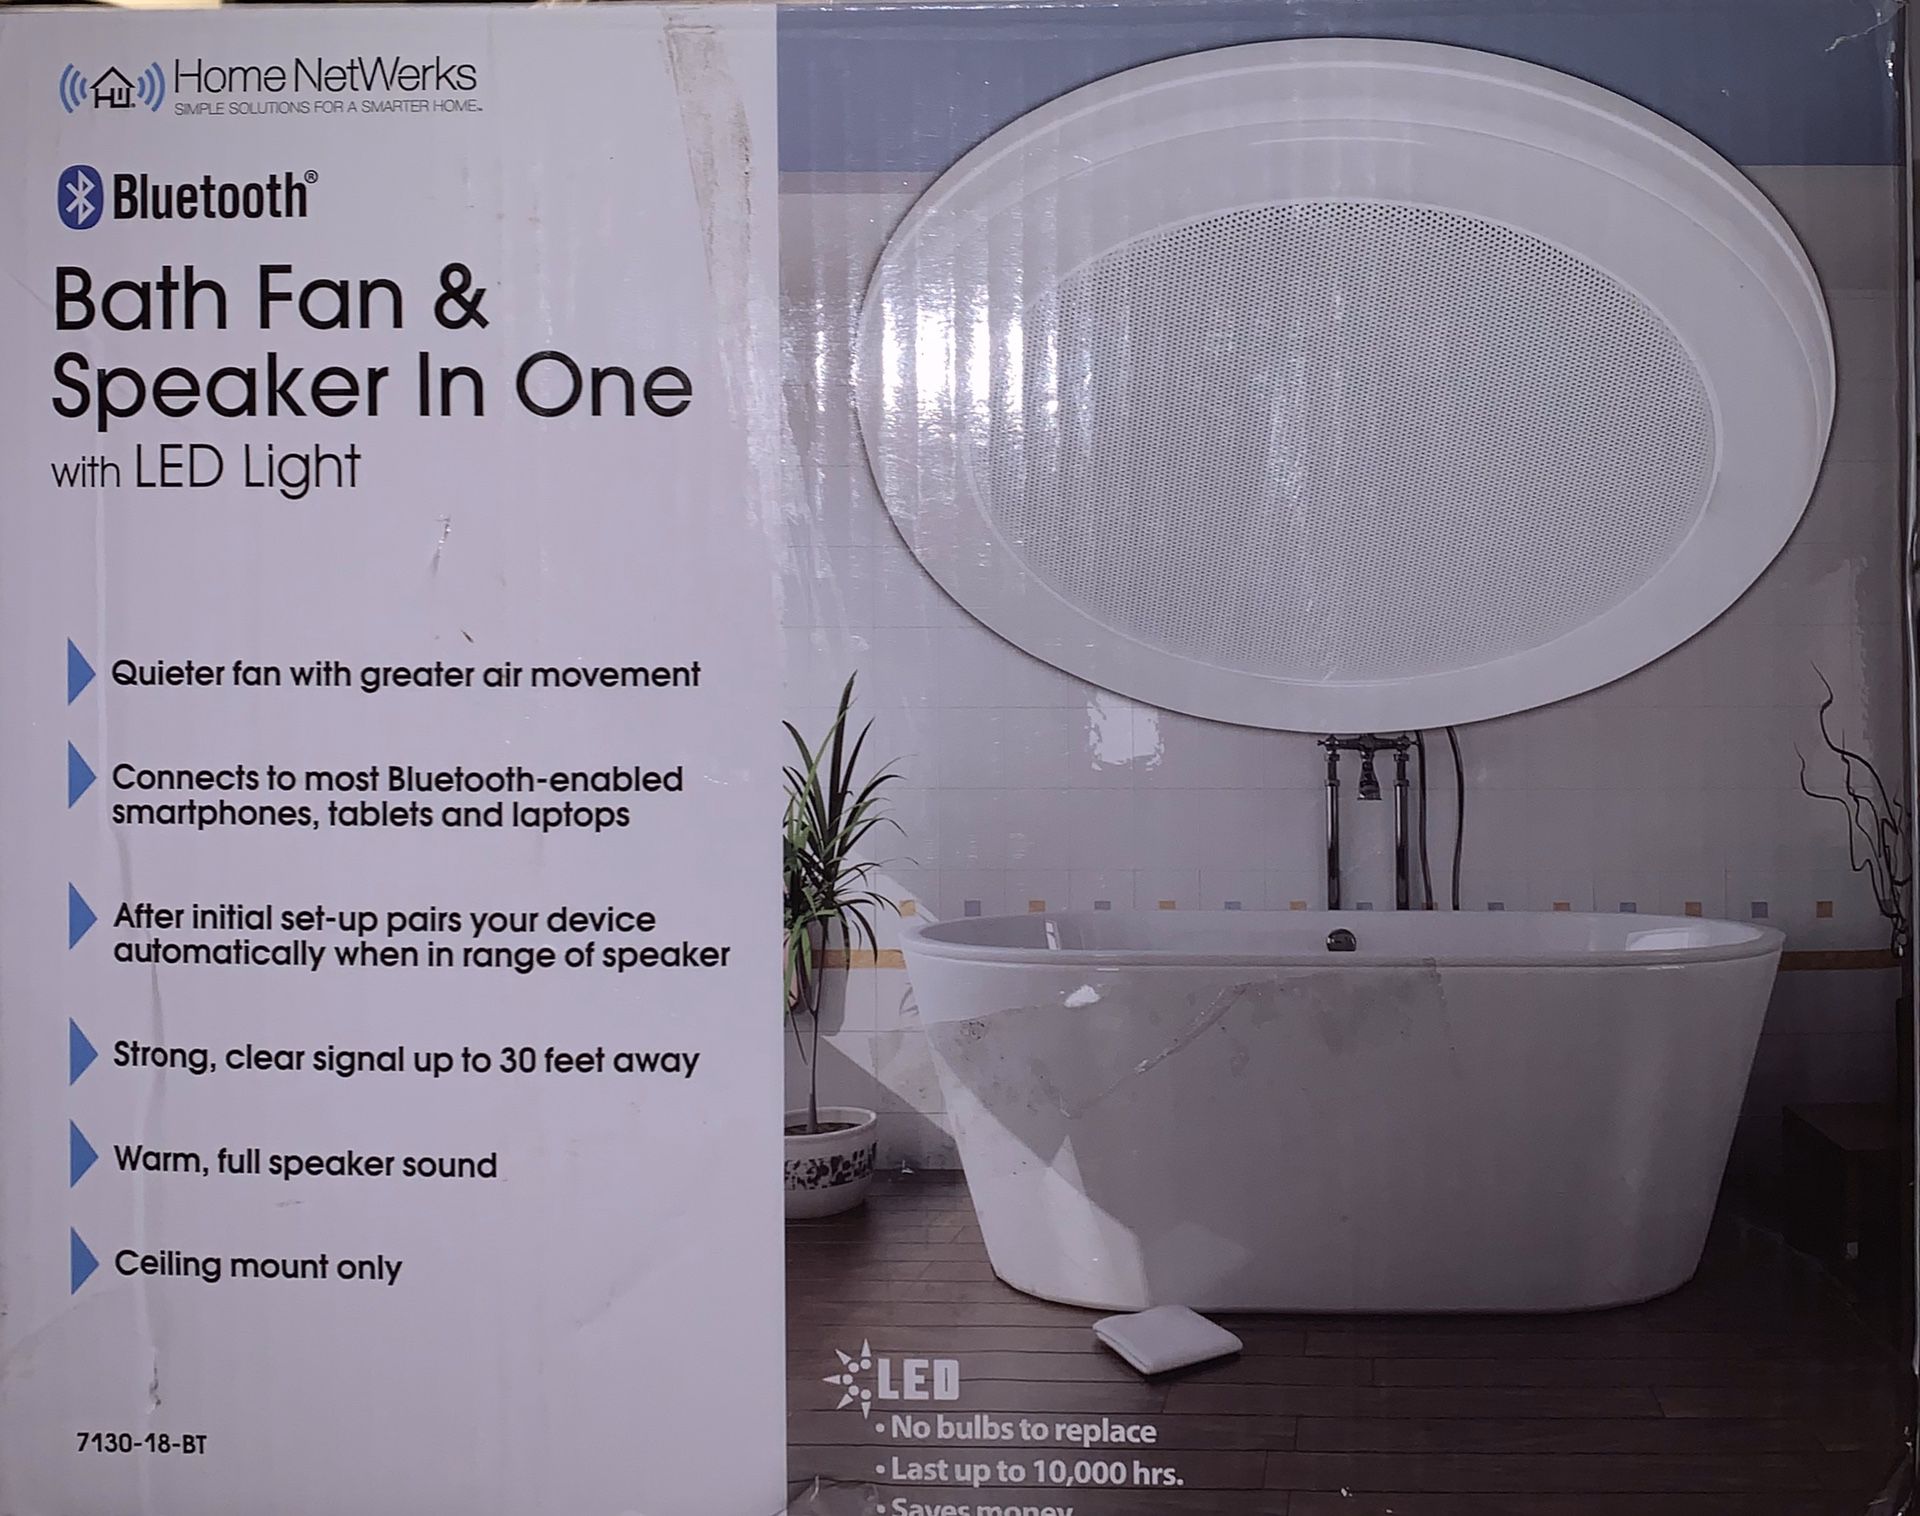 Home NetWerks Bluetooth Bath Fan & Speaker In One with LED Light!! Retails at $99.00 at Home Depot, will let it go for $45.00, 55% OFF!!